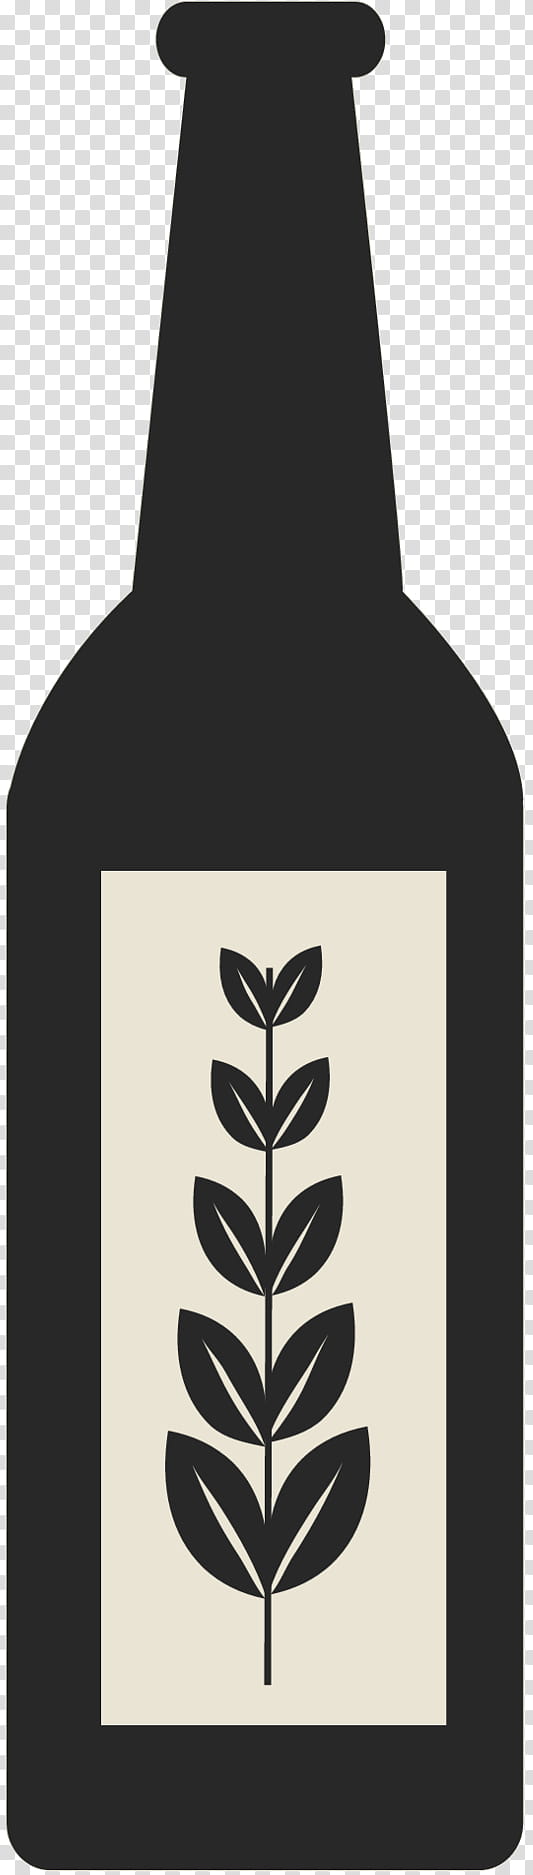 Home, Black White M, Bottle, Wine Bottle, Plant, Home Accessories, Blackandwhite, Drinkware transparent background PNG clipart